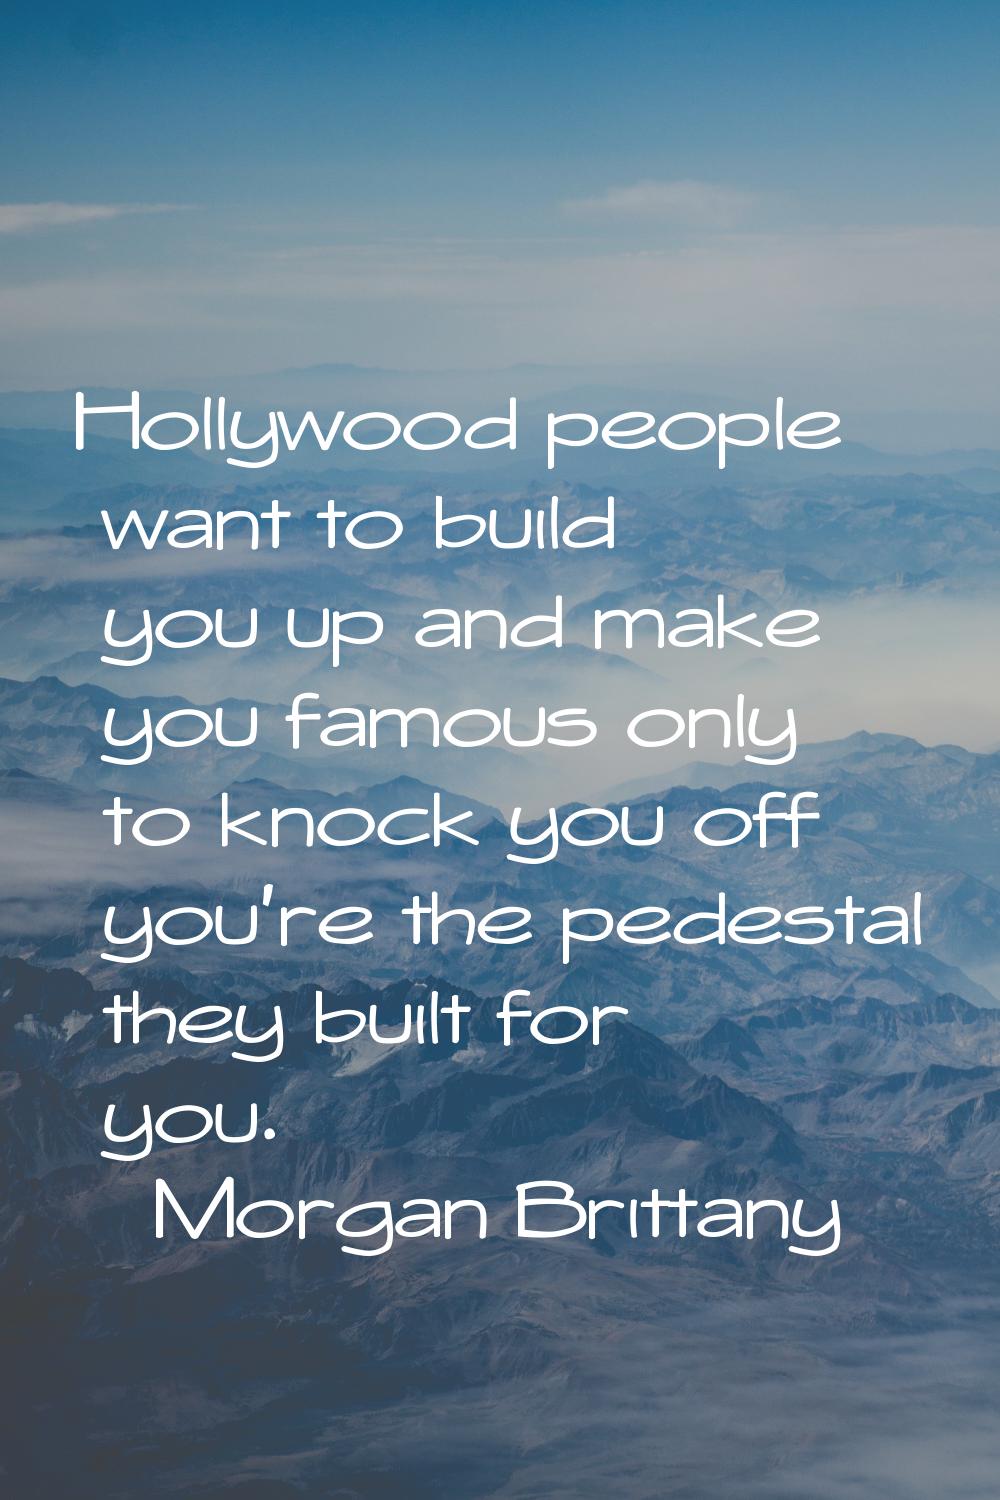 Hollywood people want to build you up and make you famous only to knock you off you're the pedestal